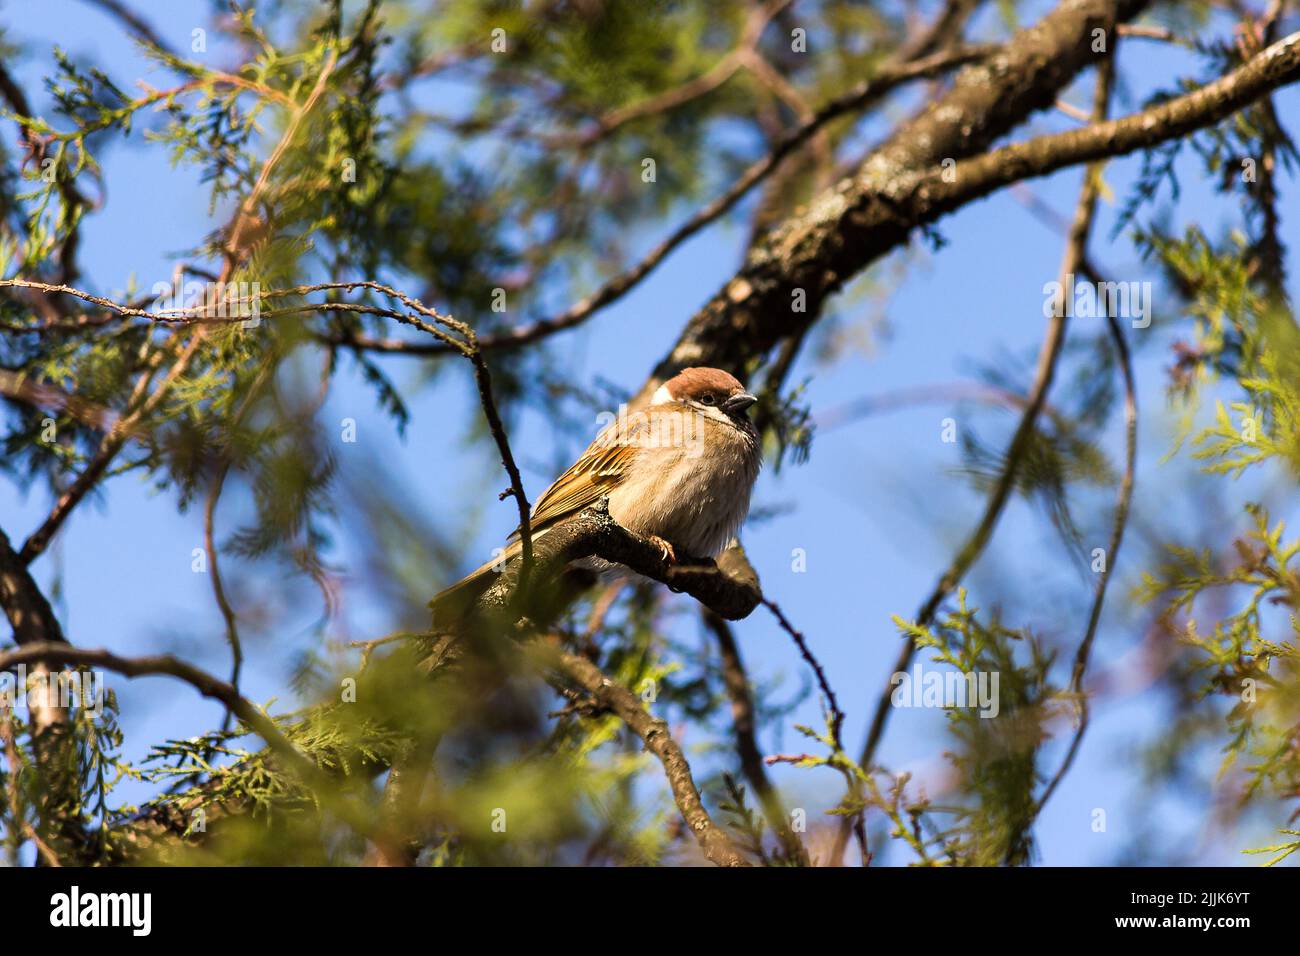 A little brown sparrow sitting on a spruce tree branch Stock Photo